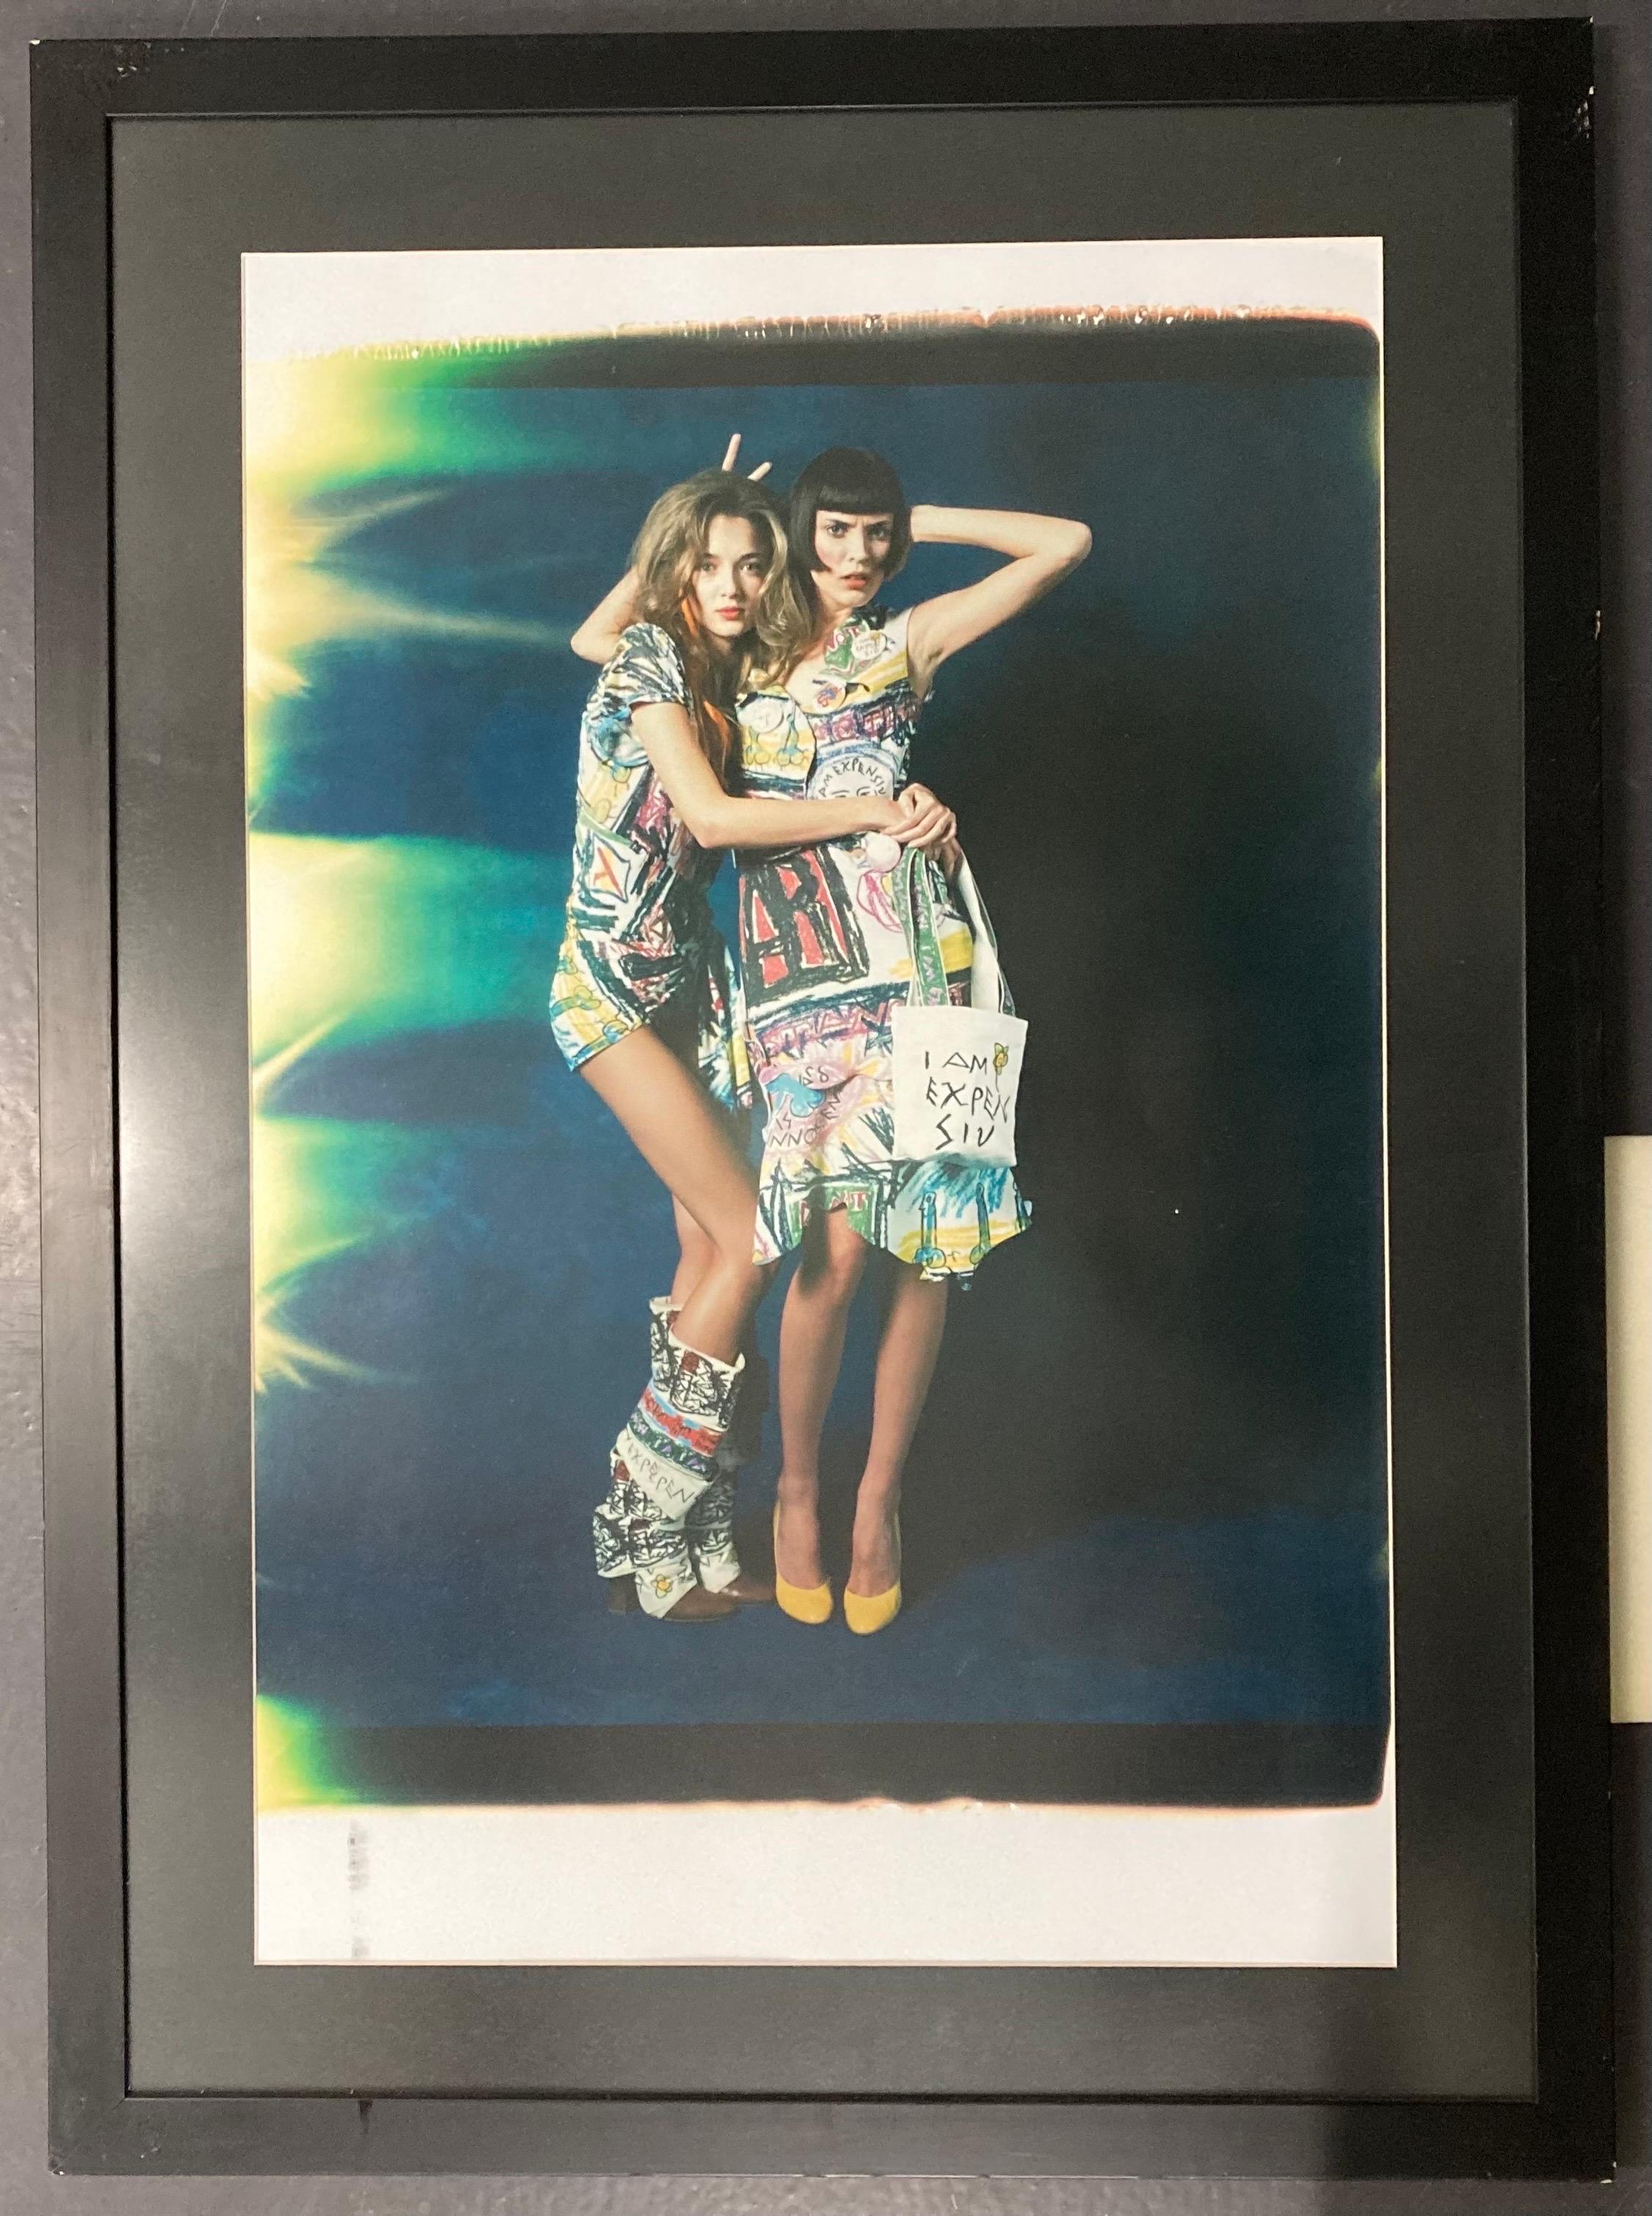 An original one-off large format Polaroid photograph for the Vivienne Westwood Active Resistance limited edition book produced by Opus. By photographer Zenon Texeira.

Large-format polaroids are extremely rare and unique and as the name suggests,